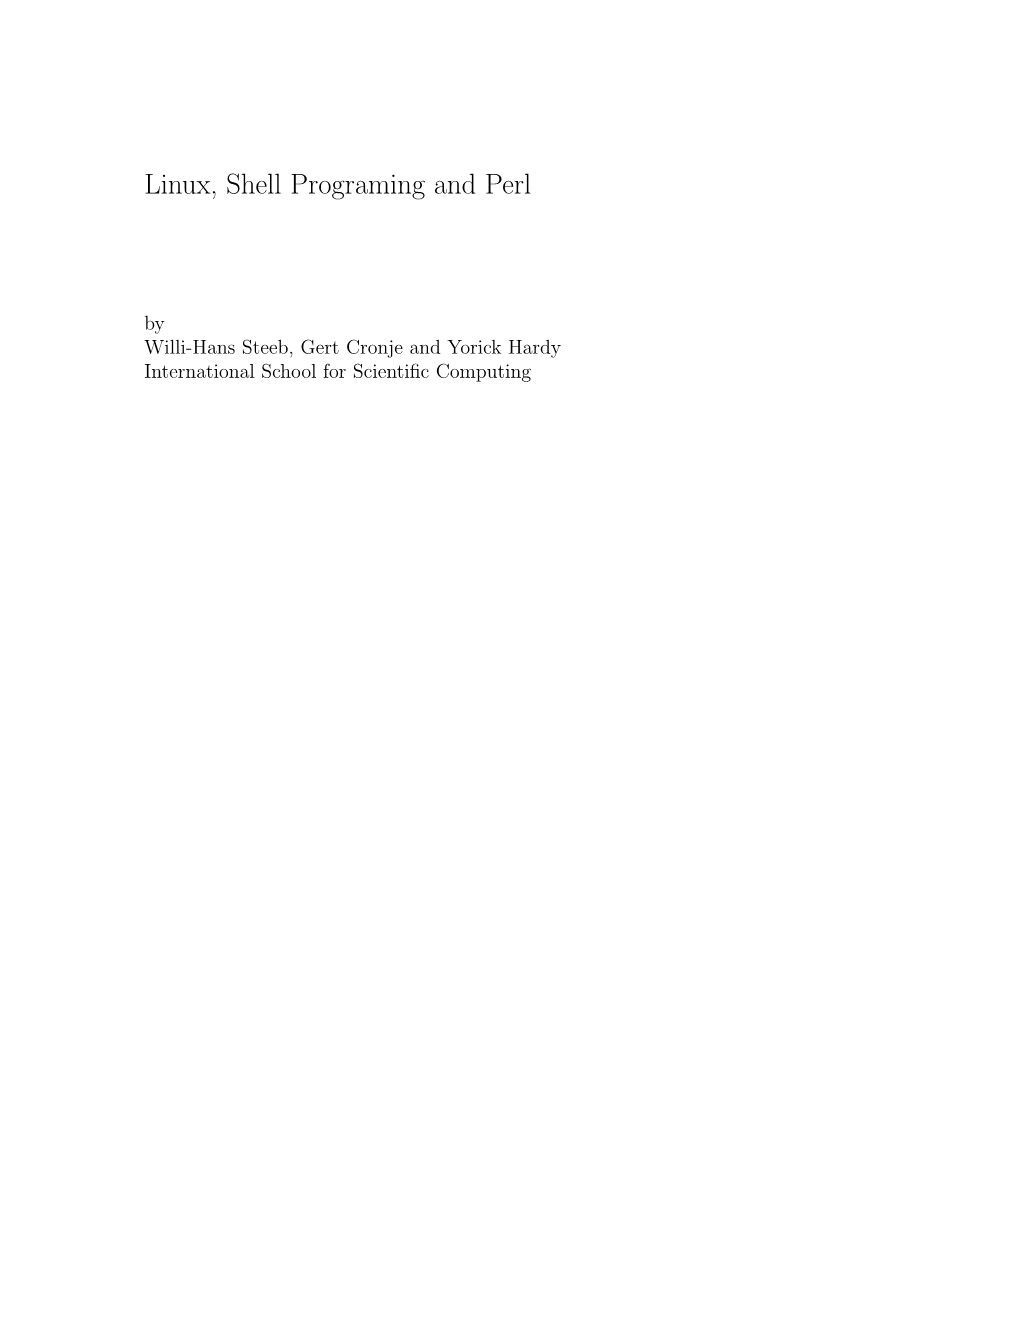 Linux, Shell Programming and Perl As Pdf File